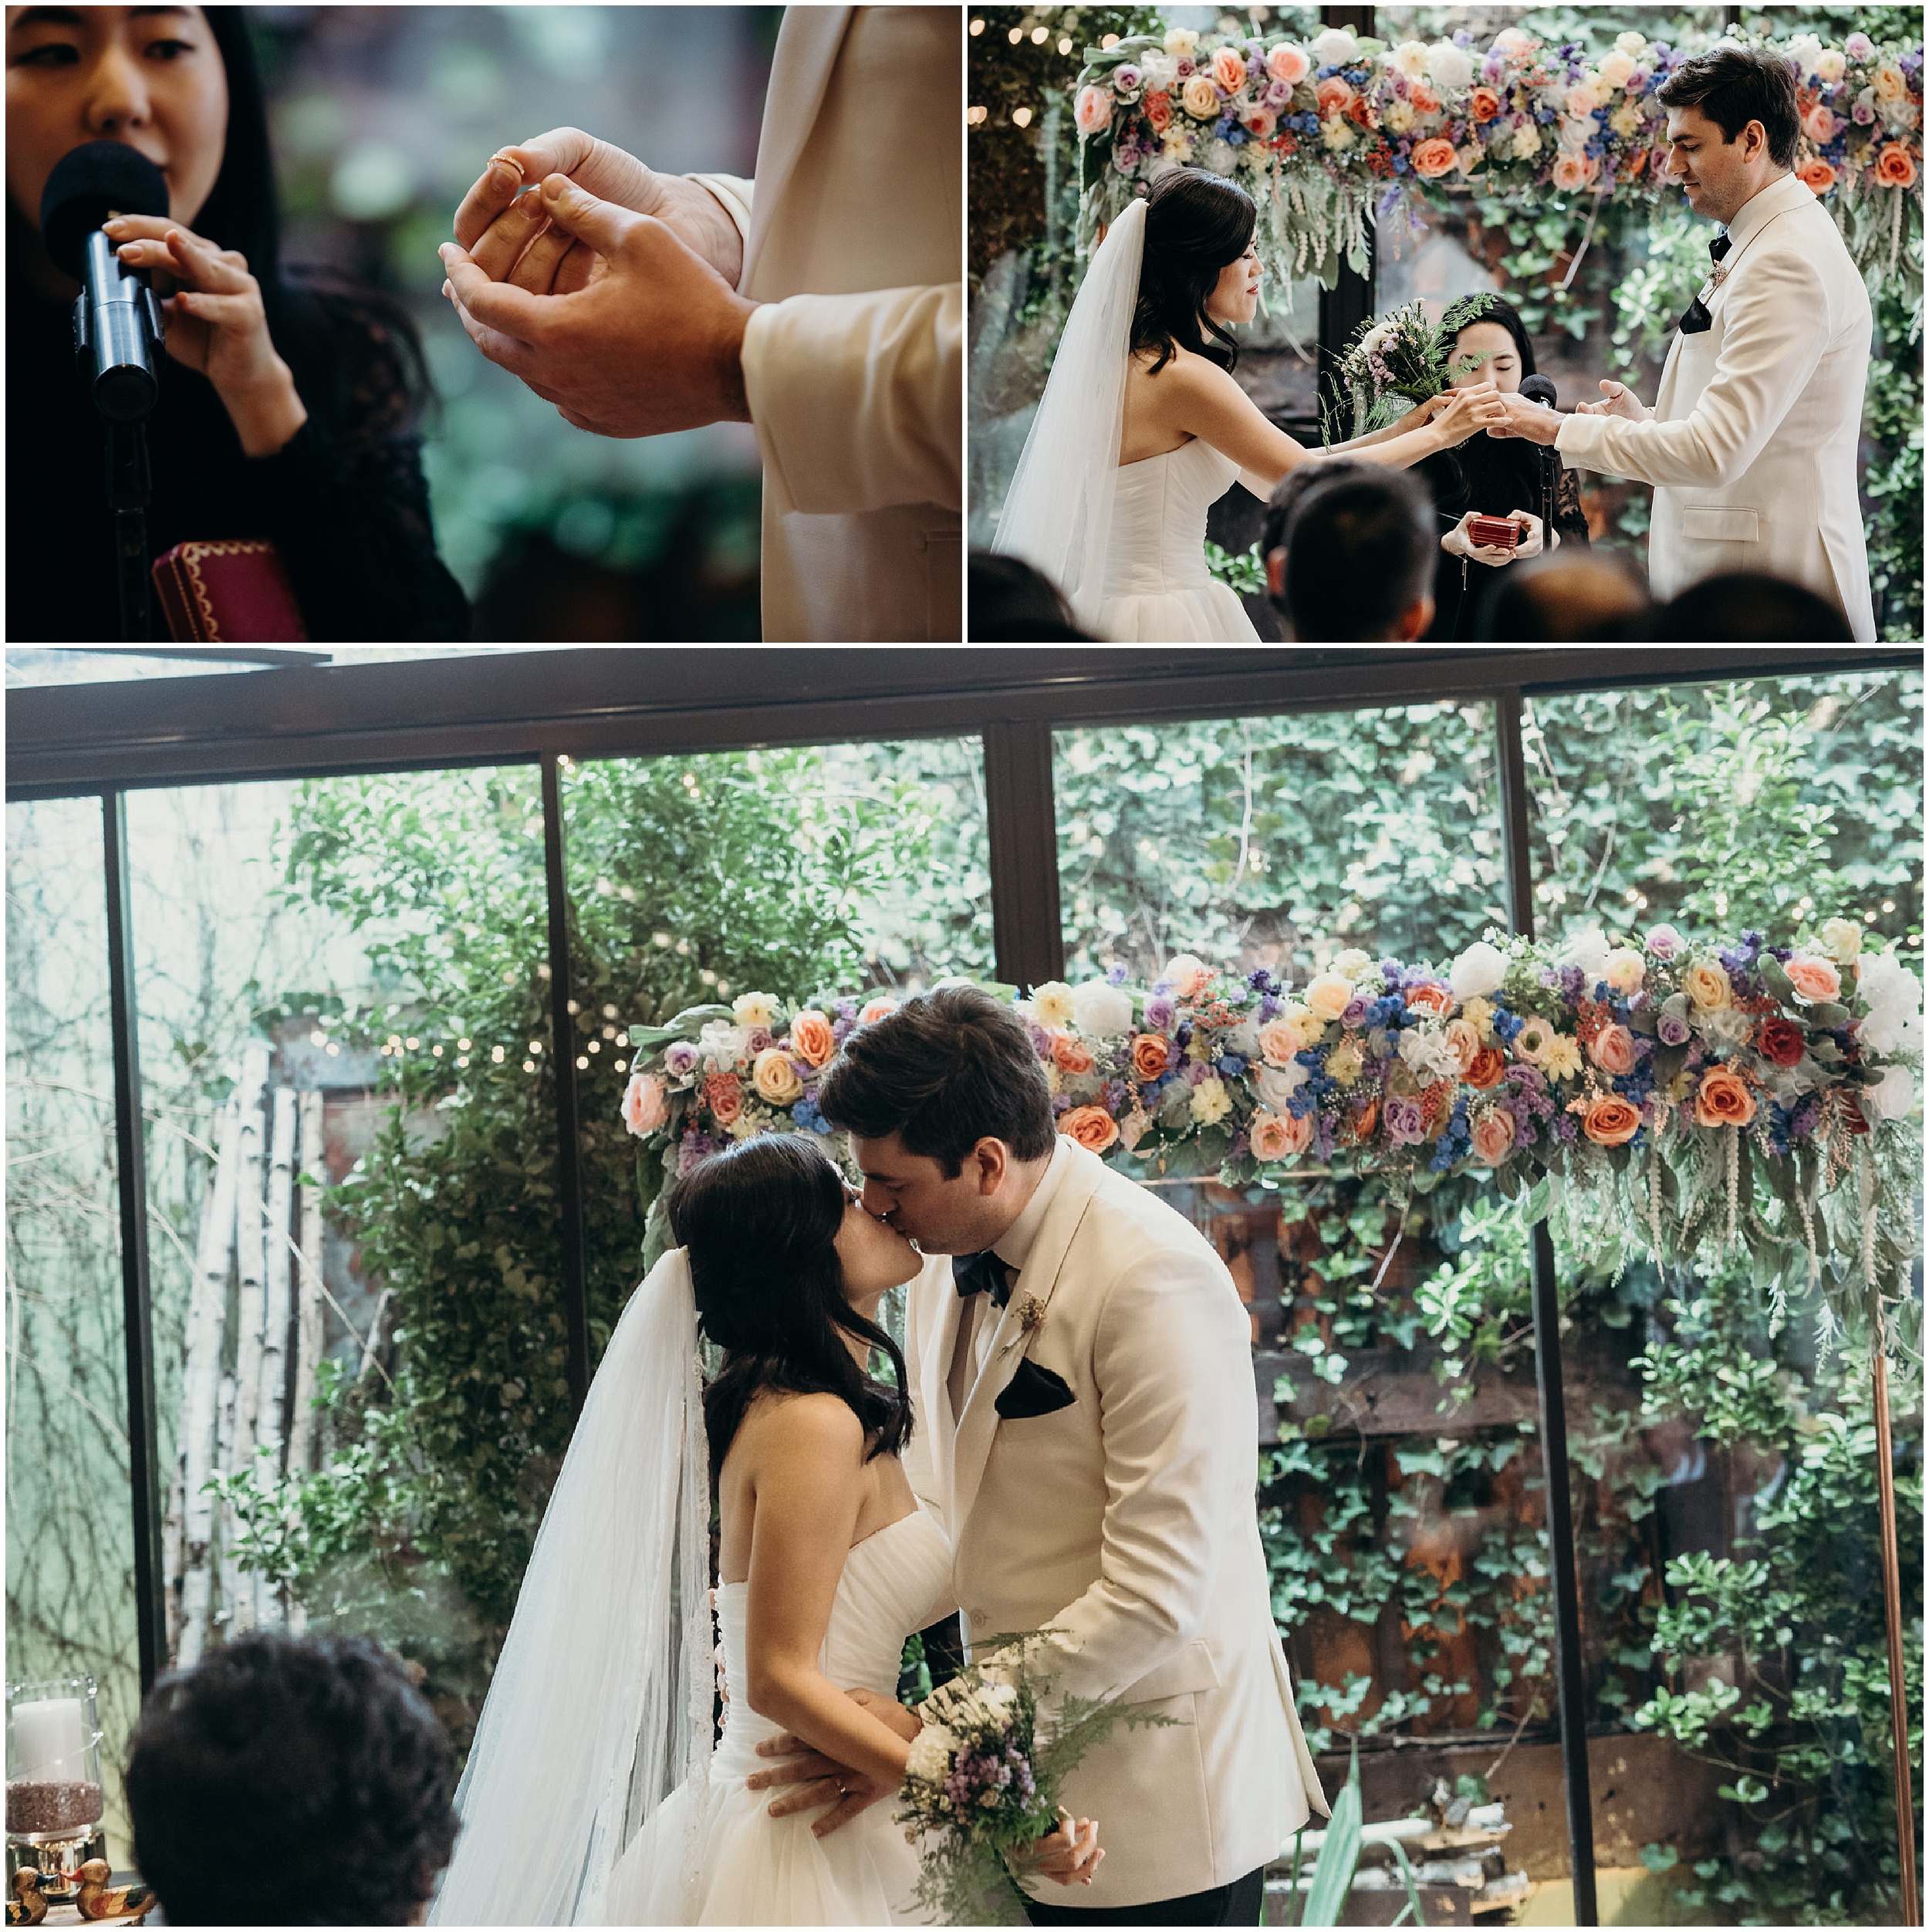 a collage of wedding ring exchanges and first kiss at mymoon in brooklyn, new york